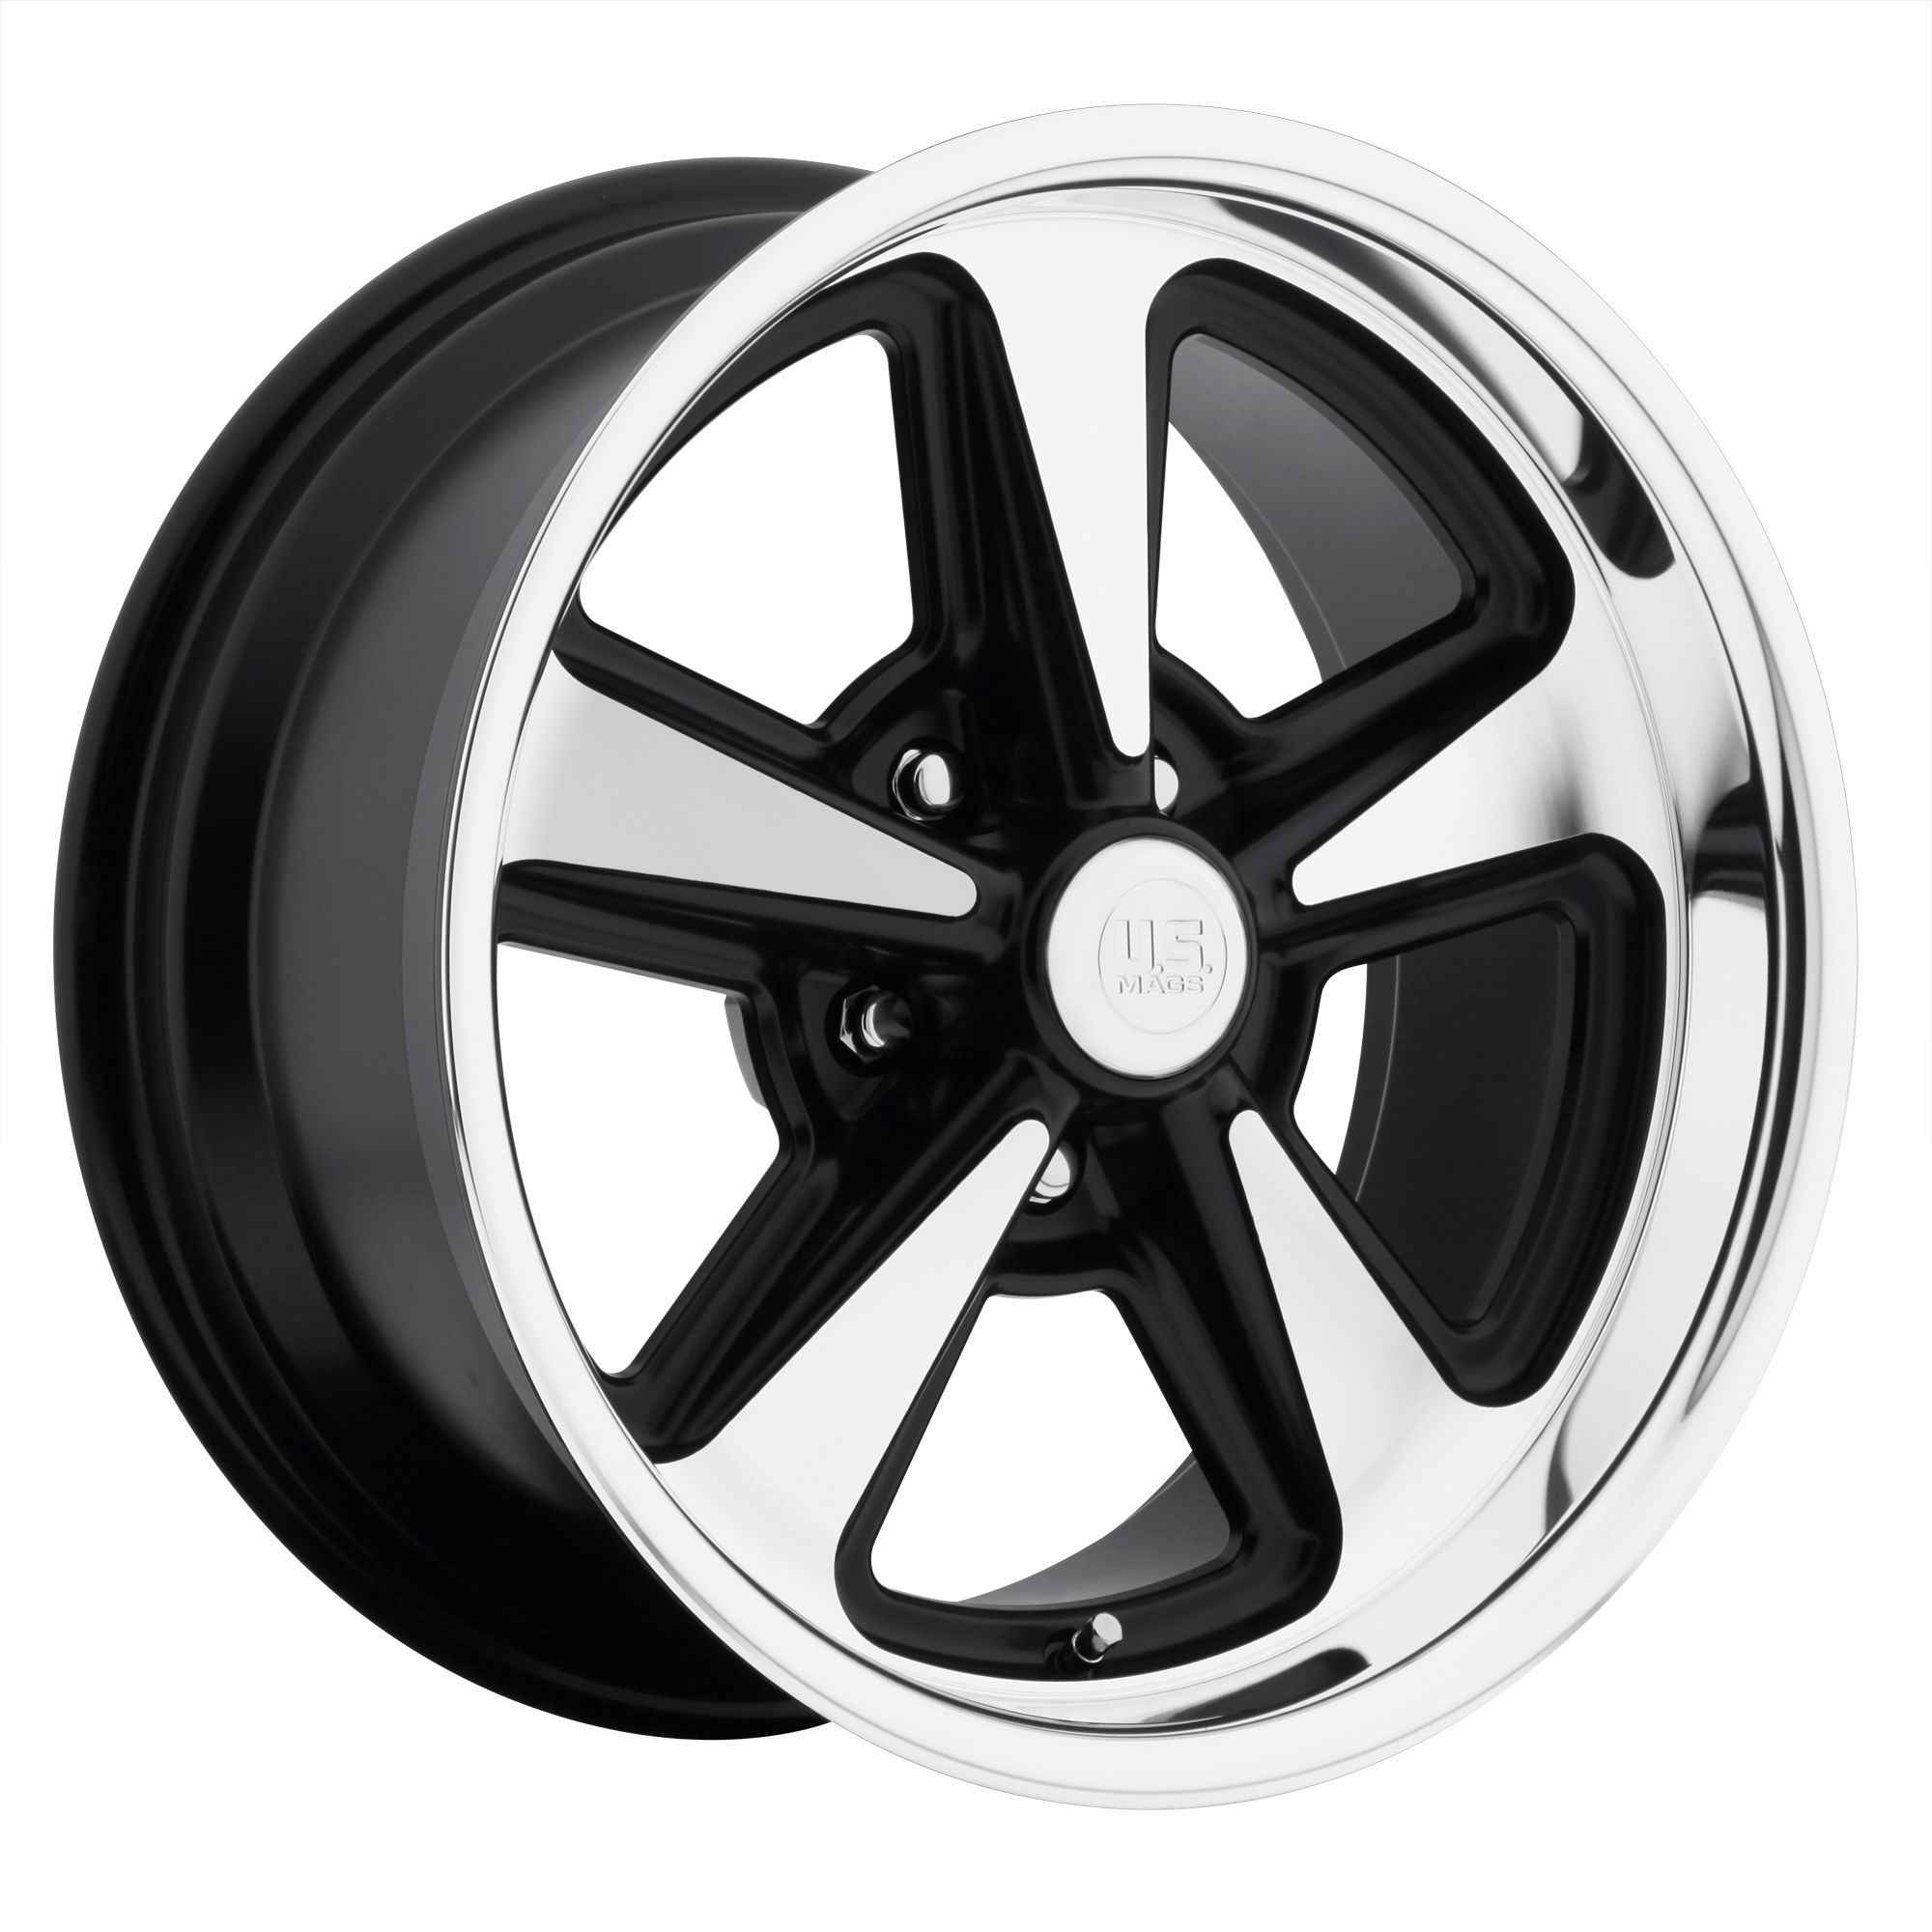 BANDIT 17x9 5x114.30 MATTE BLACK MACHINED (8 mm) - Tires and Engine Performance